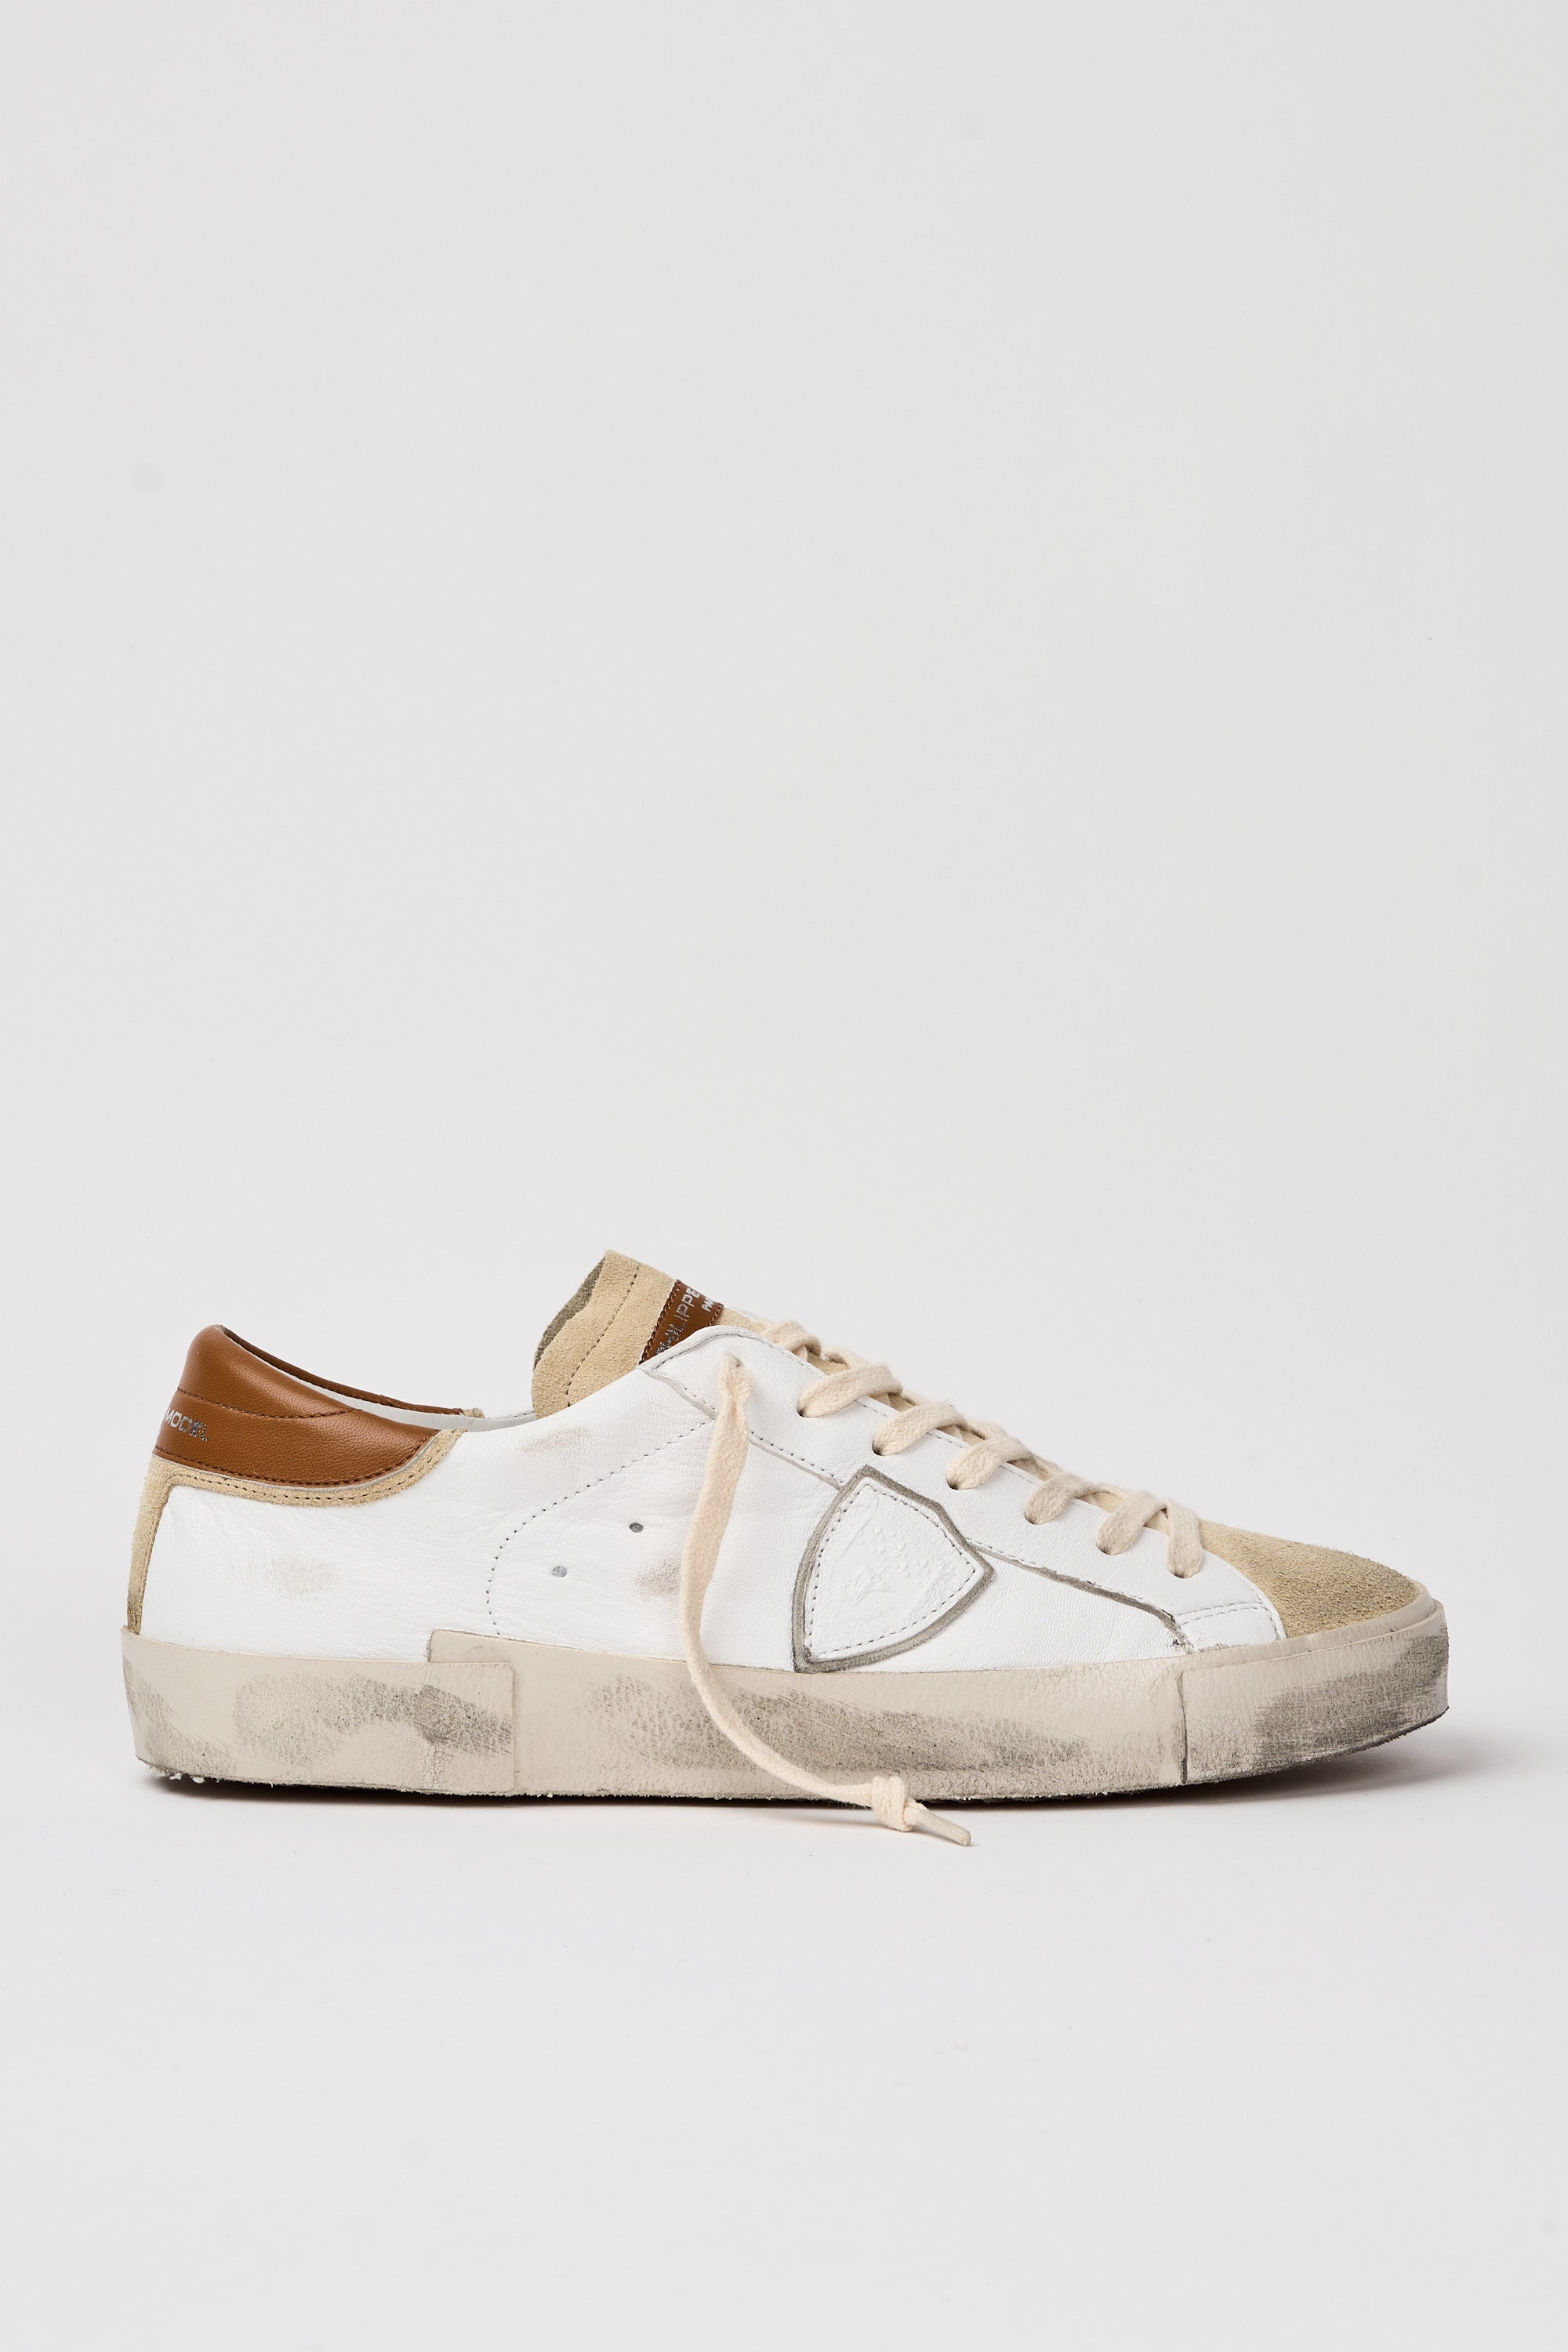 Philippe Model Sneaker PRSX Leather/Suede White/Brown-1